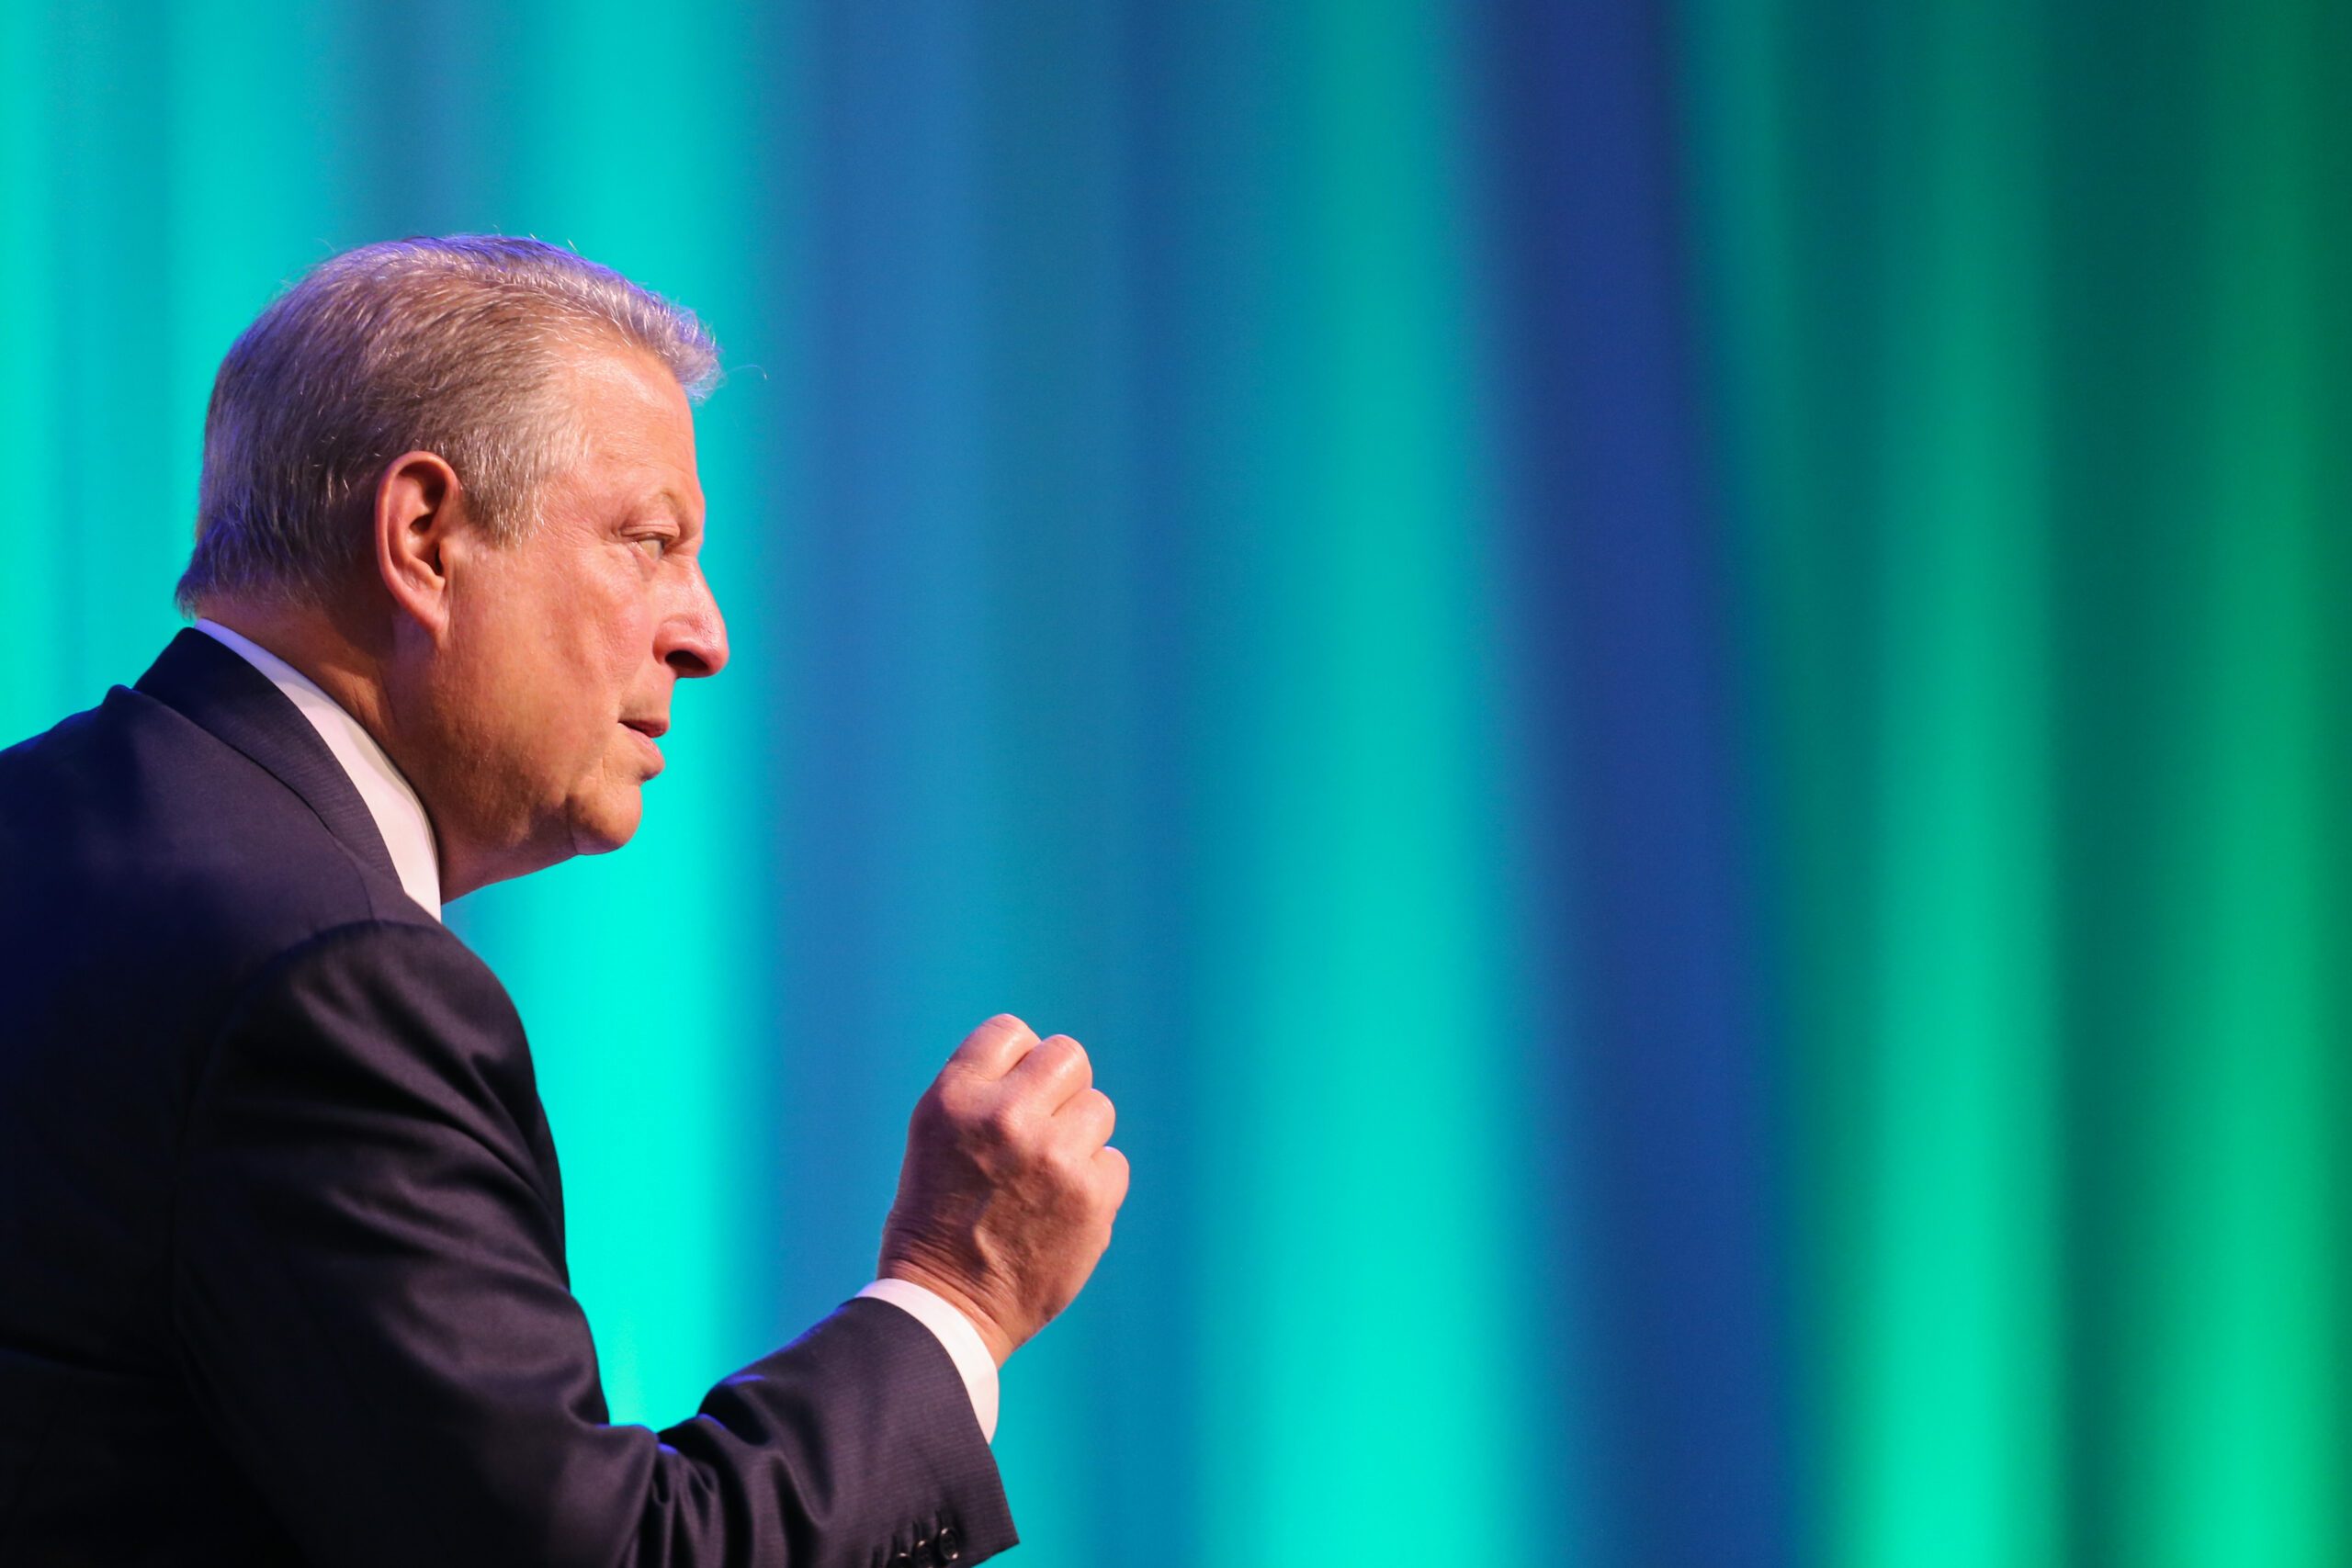 WATCH: Al Gore on technology, politics of hate, and Trump